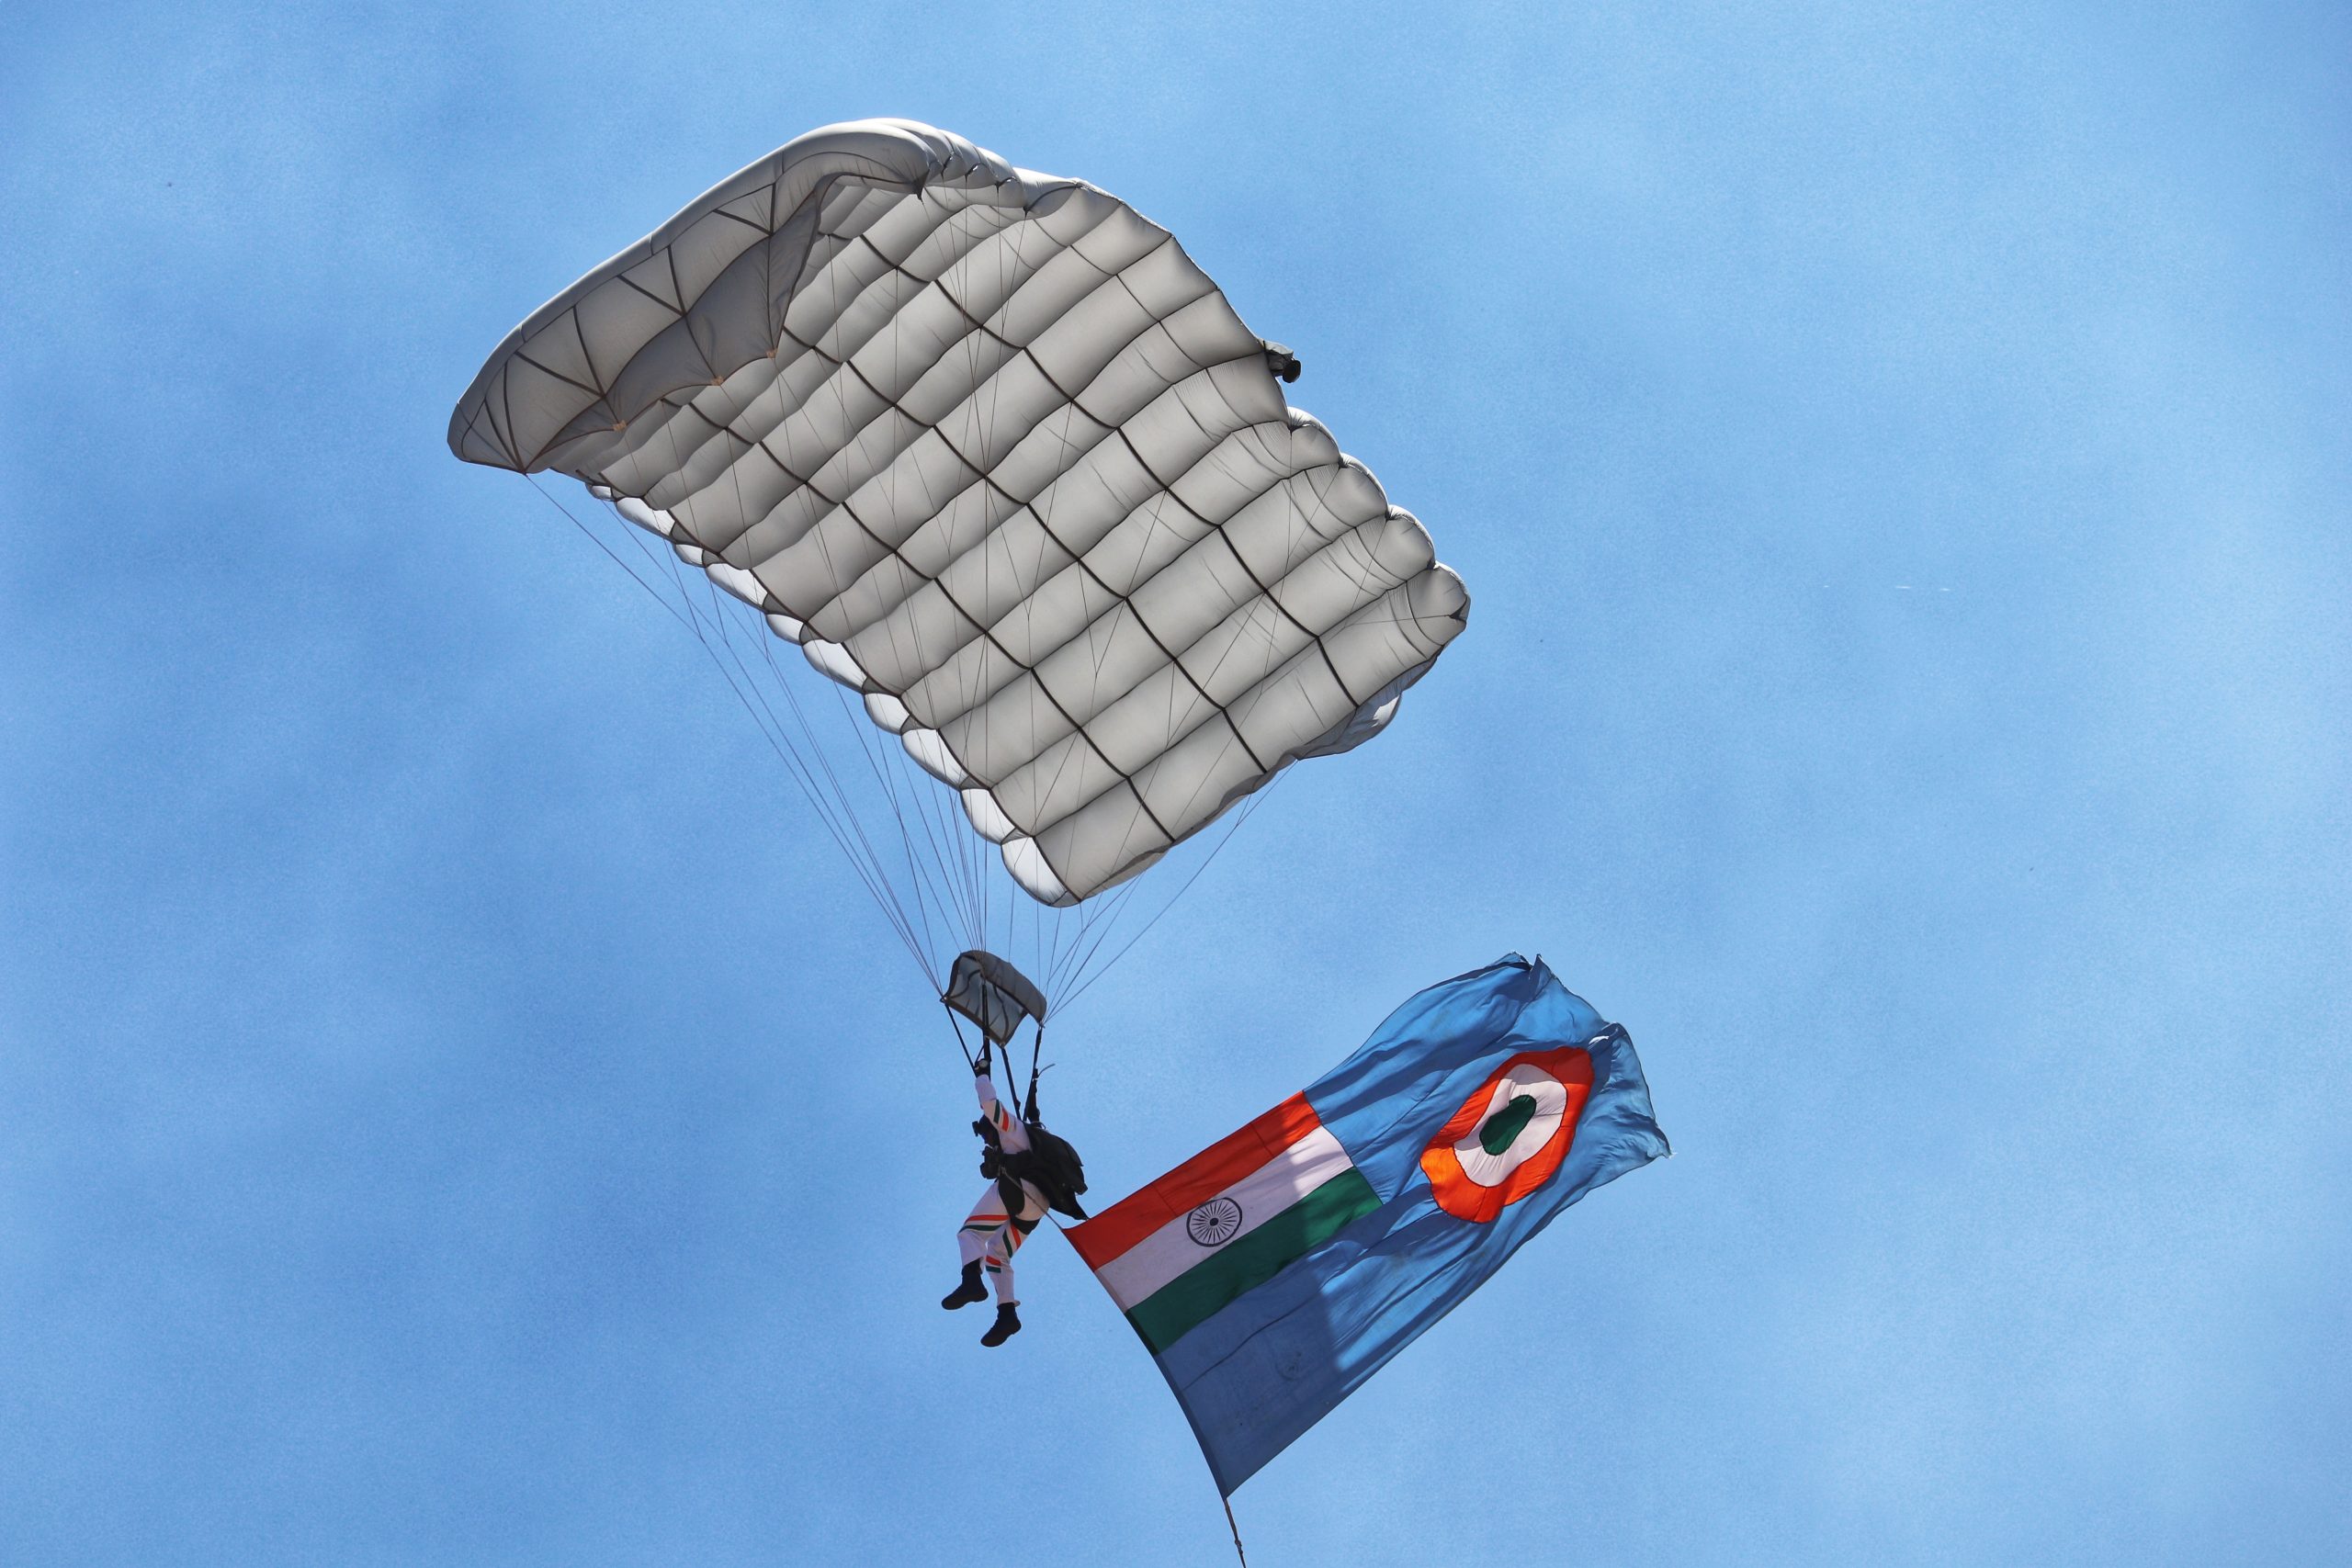 A parachute and national flag